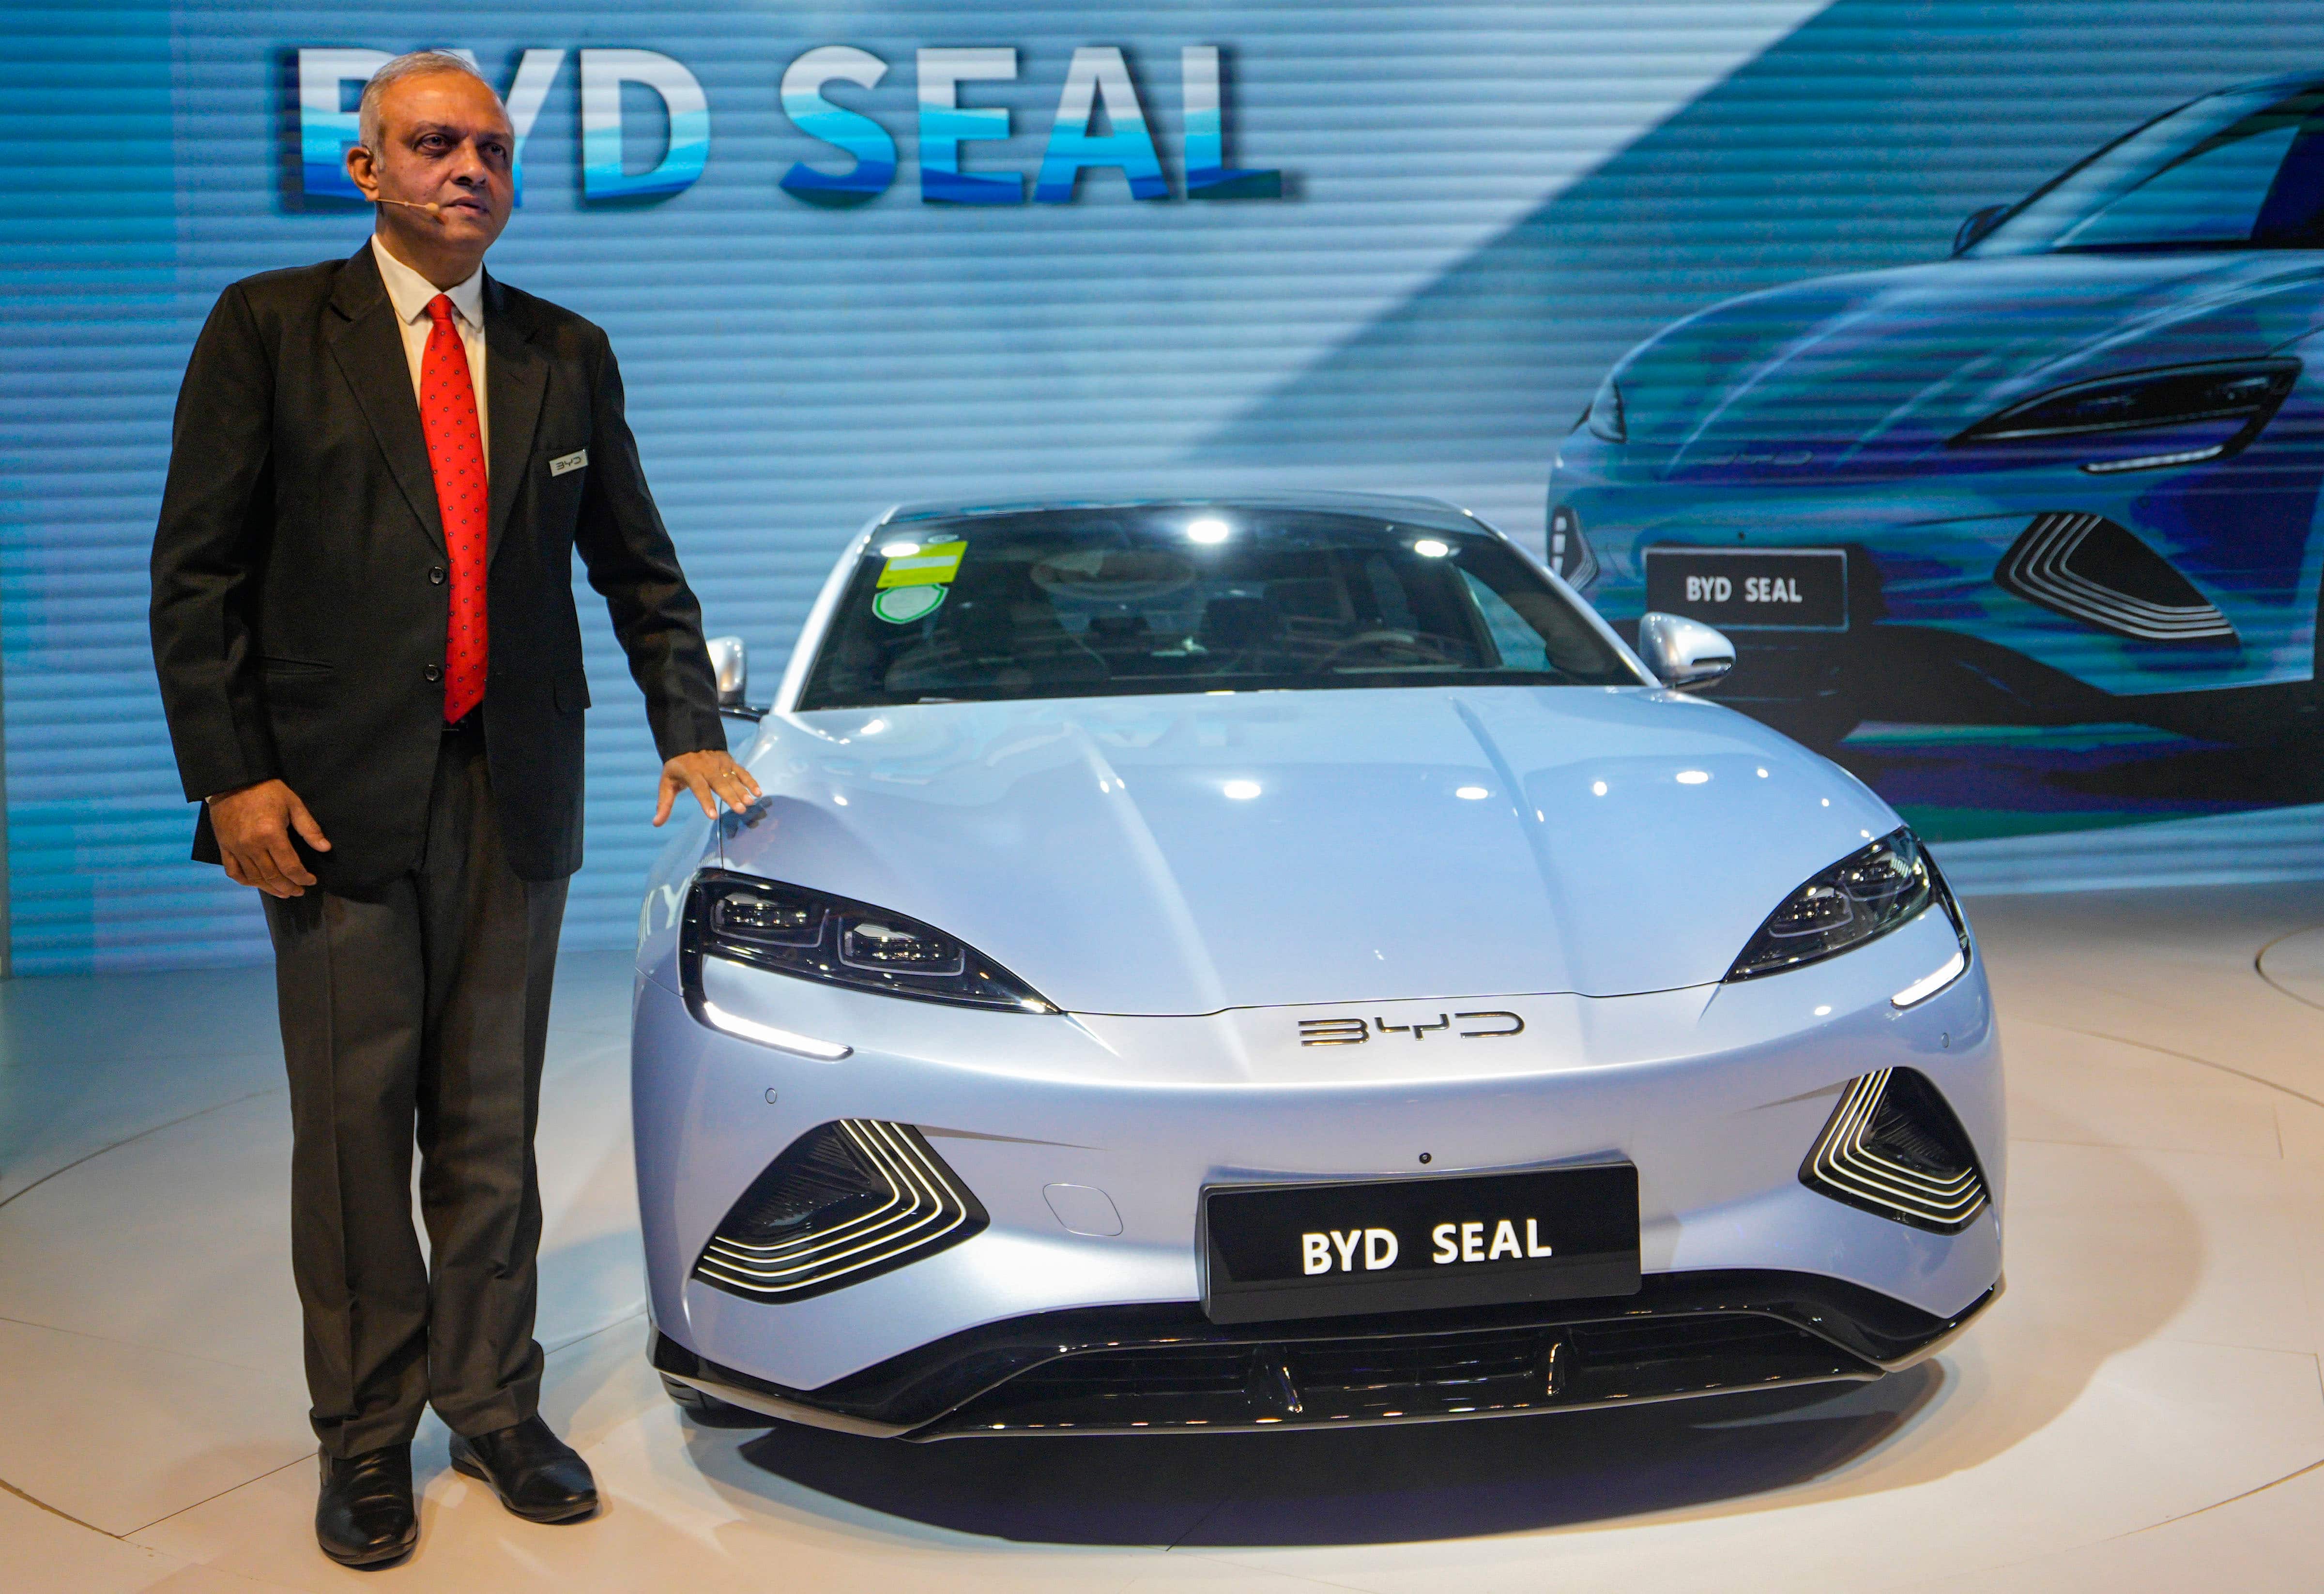 BYD Seal: Launch Details